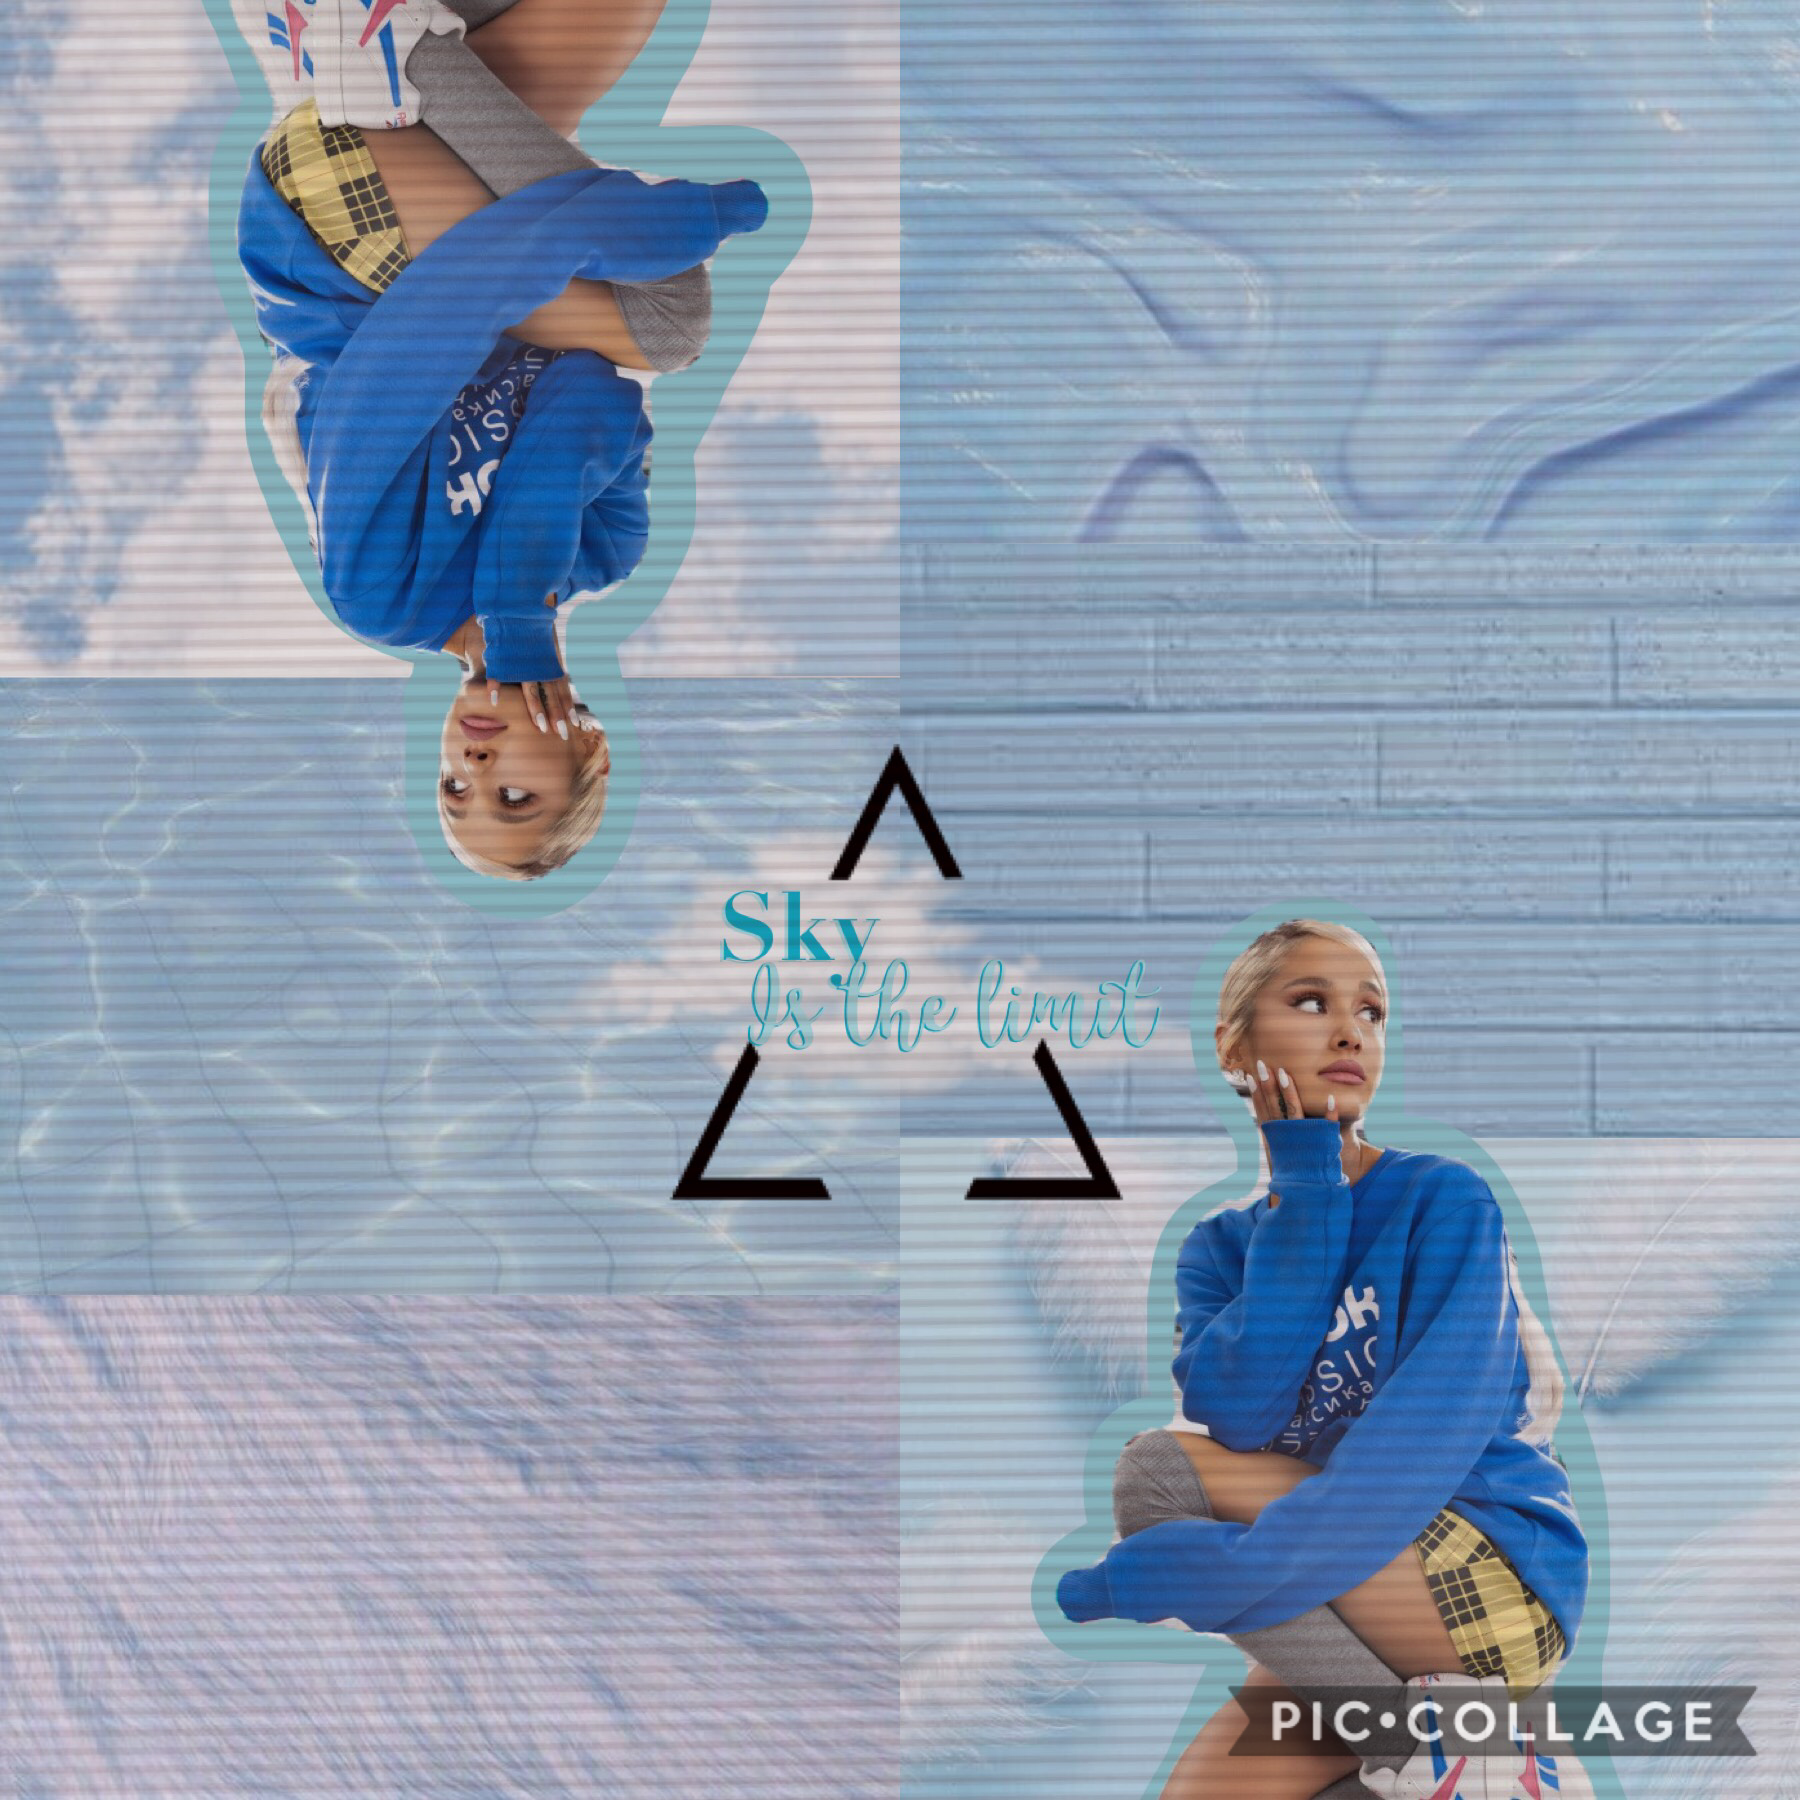 Style inspired by aquaforest!